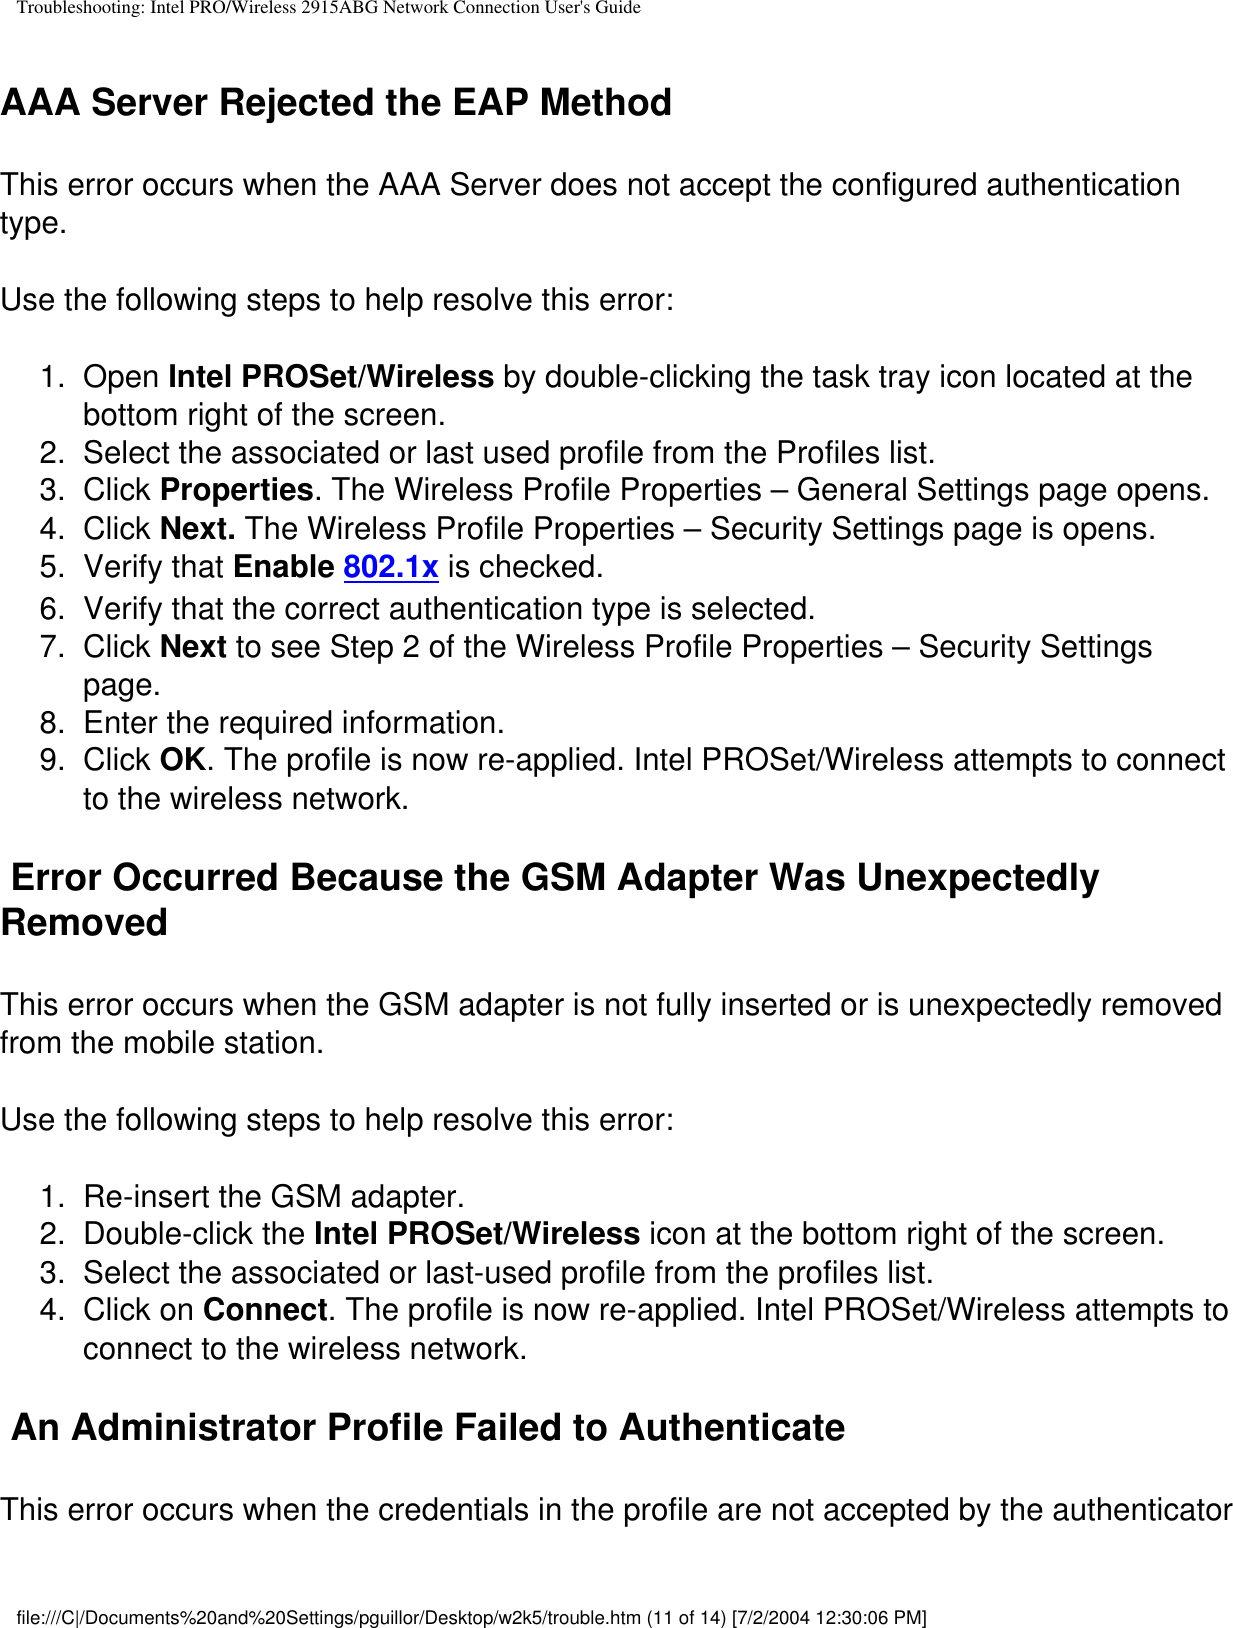 Troubleshooting: Intel PRO/Wireless 2915ABG Network Connection User&apos;s GuideAAA Server Rejected the EAP MethodThis error occurs when the AAA Server does not accept the configured authentication type.   Use the following steps to help resolve this error:1.  Open Intel PROSet/Wireless by double-clicking the task tray icon located at the bottom right of the screen.2.  Select the associated or last used profile from the Profiles list. 3.  Click Properties. The Wireless Profile Properties – General Settings page opens.4.  Click Next. The Wireless Profile Properties – Security Settings page is opens.5.  Verify that Enable 802.1x is checked. 6.  Verify that the correct authentication type is selected.7.  Click Next to see Step 2 of the Wireless Profile Properties – Security Settings page.8.  Enter the required information.9.  Click OK. The profile is now re-applied. Intel PROSet/Wireless attempts to connect to the wireless network. Error Occurred Because the GSM Adapter Was Unexpectedly RemovedThis error occurs when the GSM adapter is not fully inserted or is unexpectedly removed from the mobile station.   Use the following steps to help resolve this error:1.  Re-insert the GSM adapter.2.  Double-click the Intel PROSet/Wireless icon at the bottom right of the screen.3.  Select the associated or last-used profile from the profiles list.4.  Click on Connect. The profile is now re-applied. Intel PROSet/Wireless attempts to connect to the wireless network. An Administrator Profile Failed to AuthenticateThis error occurs when the credentials in the profile are not accepted by the authenticator file:///C|/Documents%20and%20Settings/pguillor/Desktop/w2k5/trouble.htm (11 of 14) [7/2/2004 12:30:06 PM]